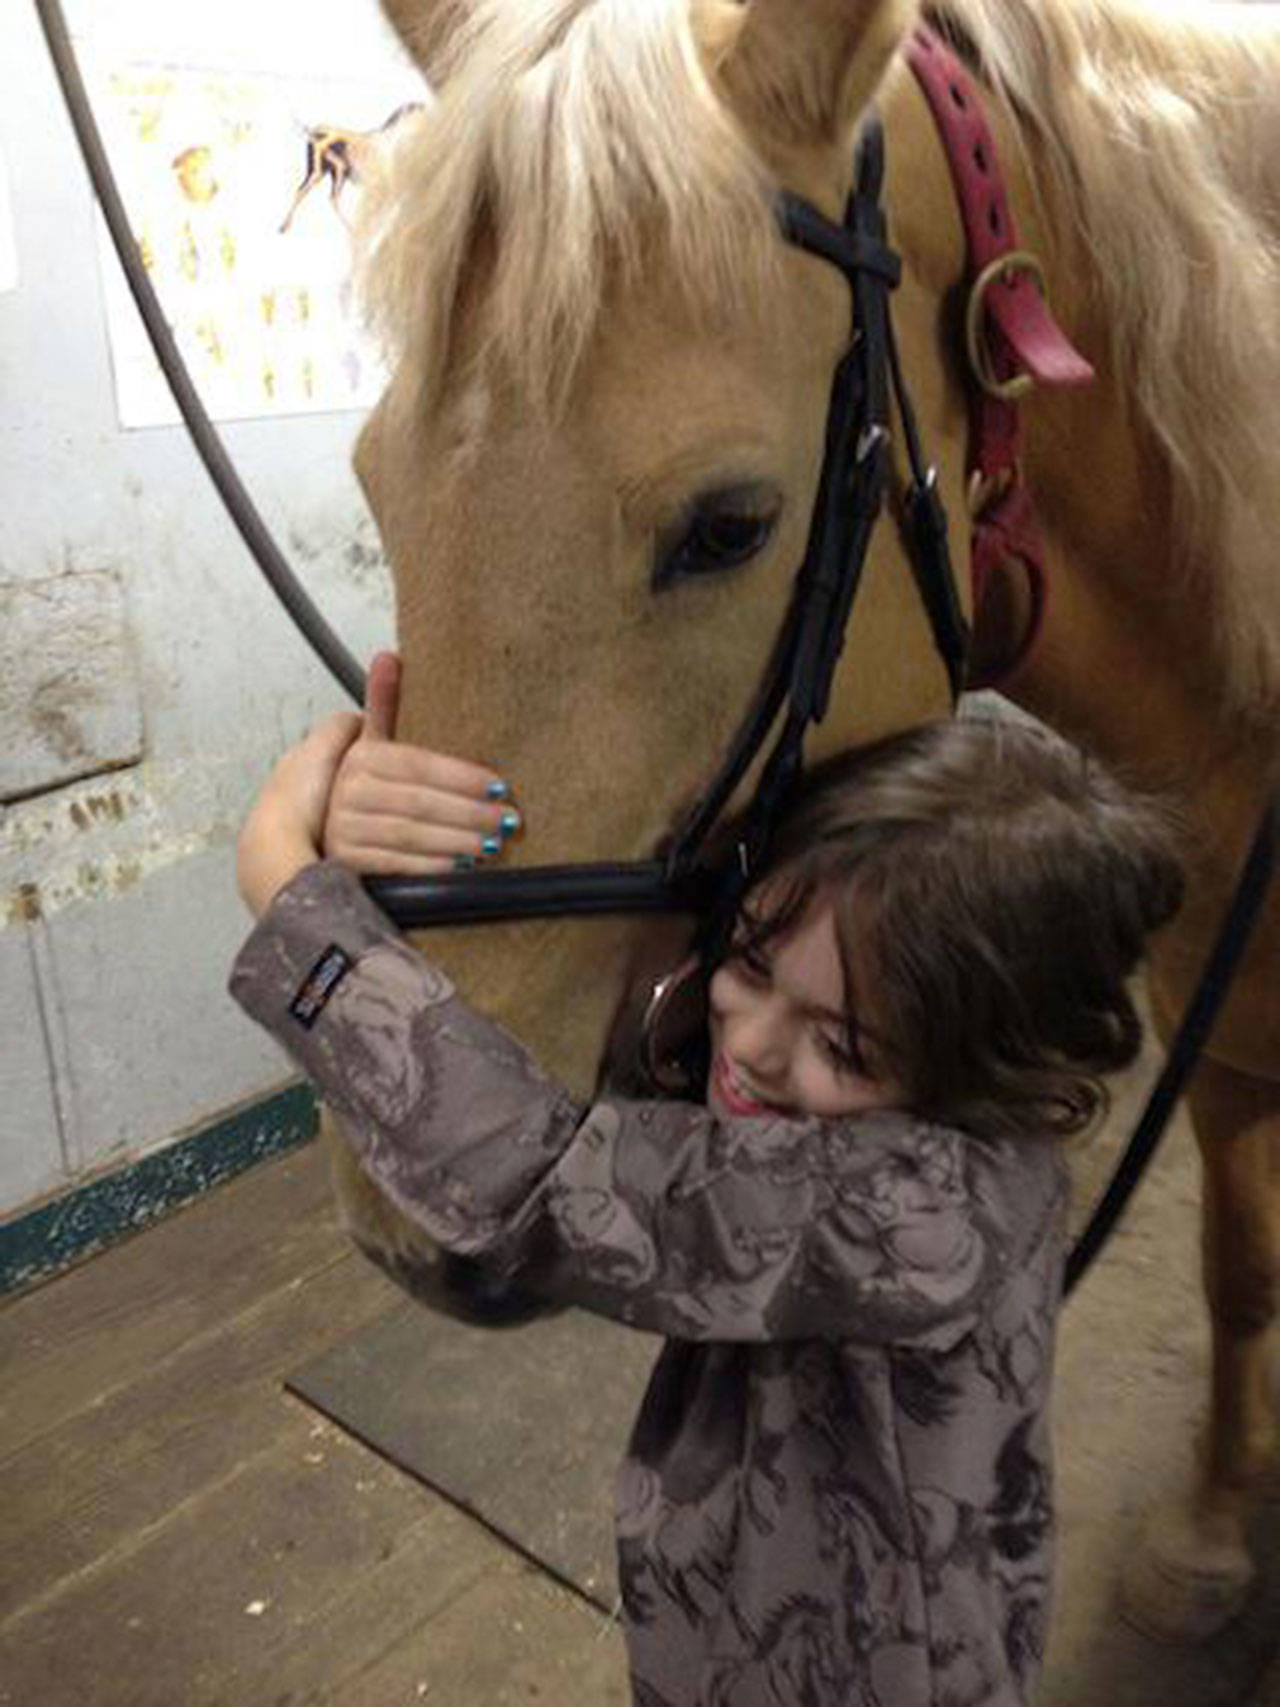 The horse that started it all, Tasha, with a young friend. (Courtesy Photo)